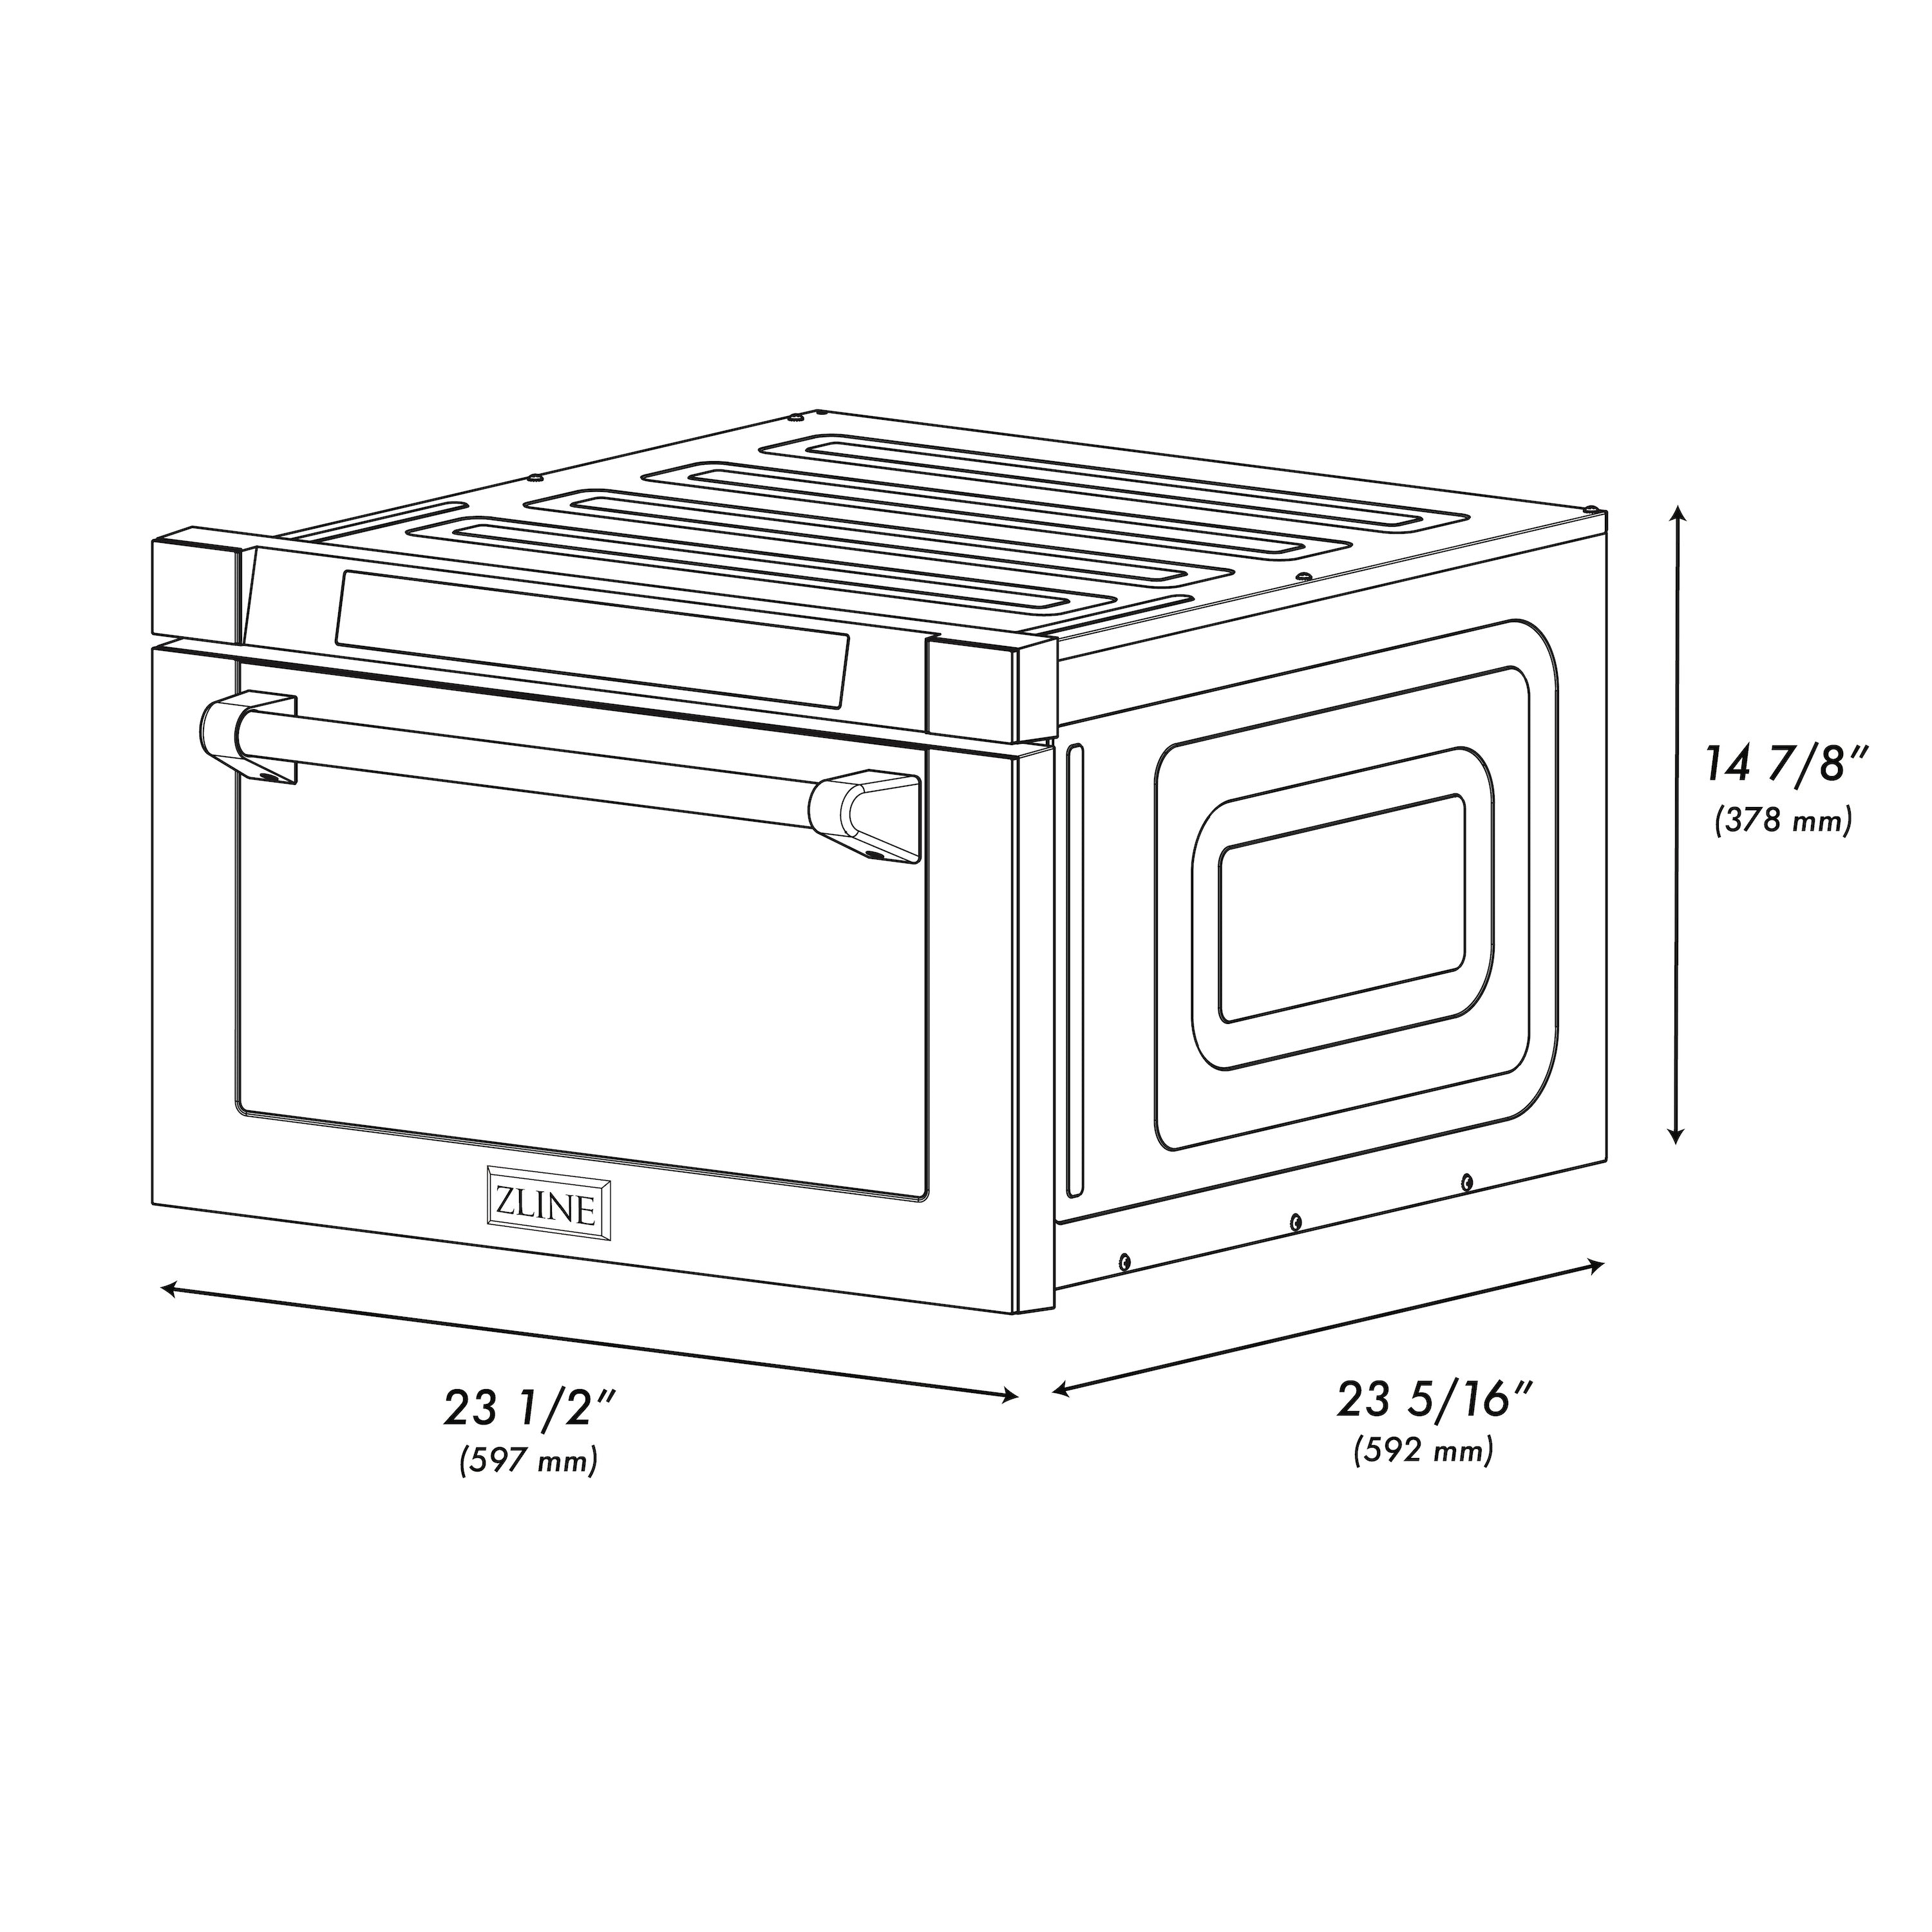 ZLINE 24" 1.2 cu. ft. Built-in Microwave Drawer with a Traditional Handle in Stainless Steel